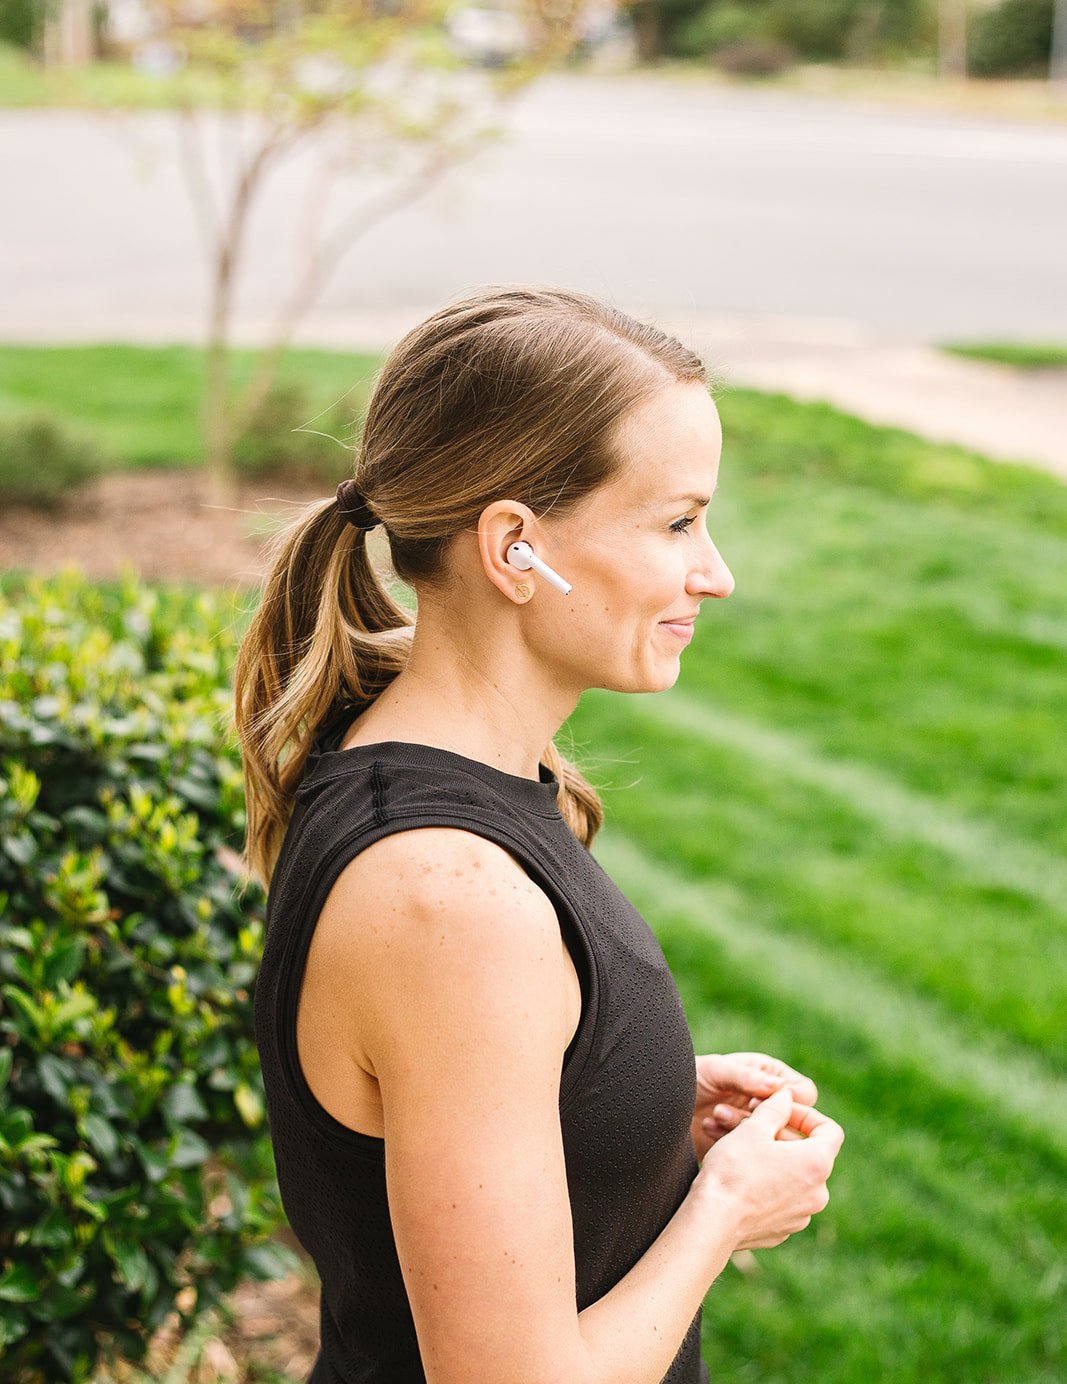 Apple Airpods Review from a Marathon Runner